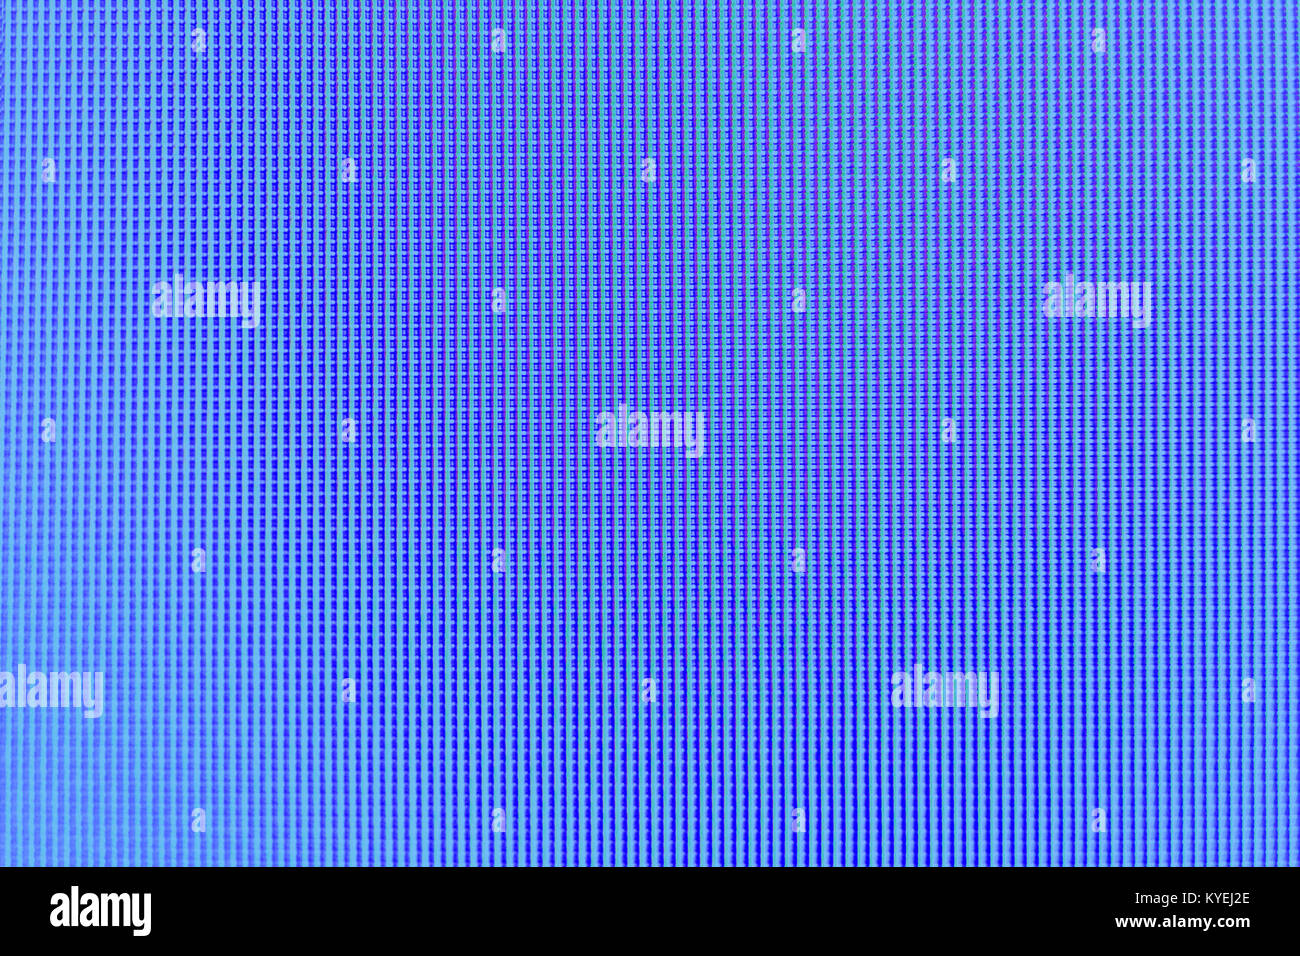 Blue abstract monitor led screen texture background Stock Photo